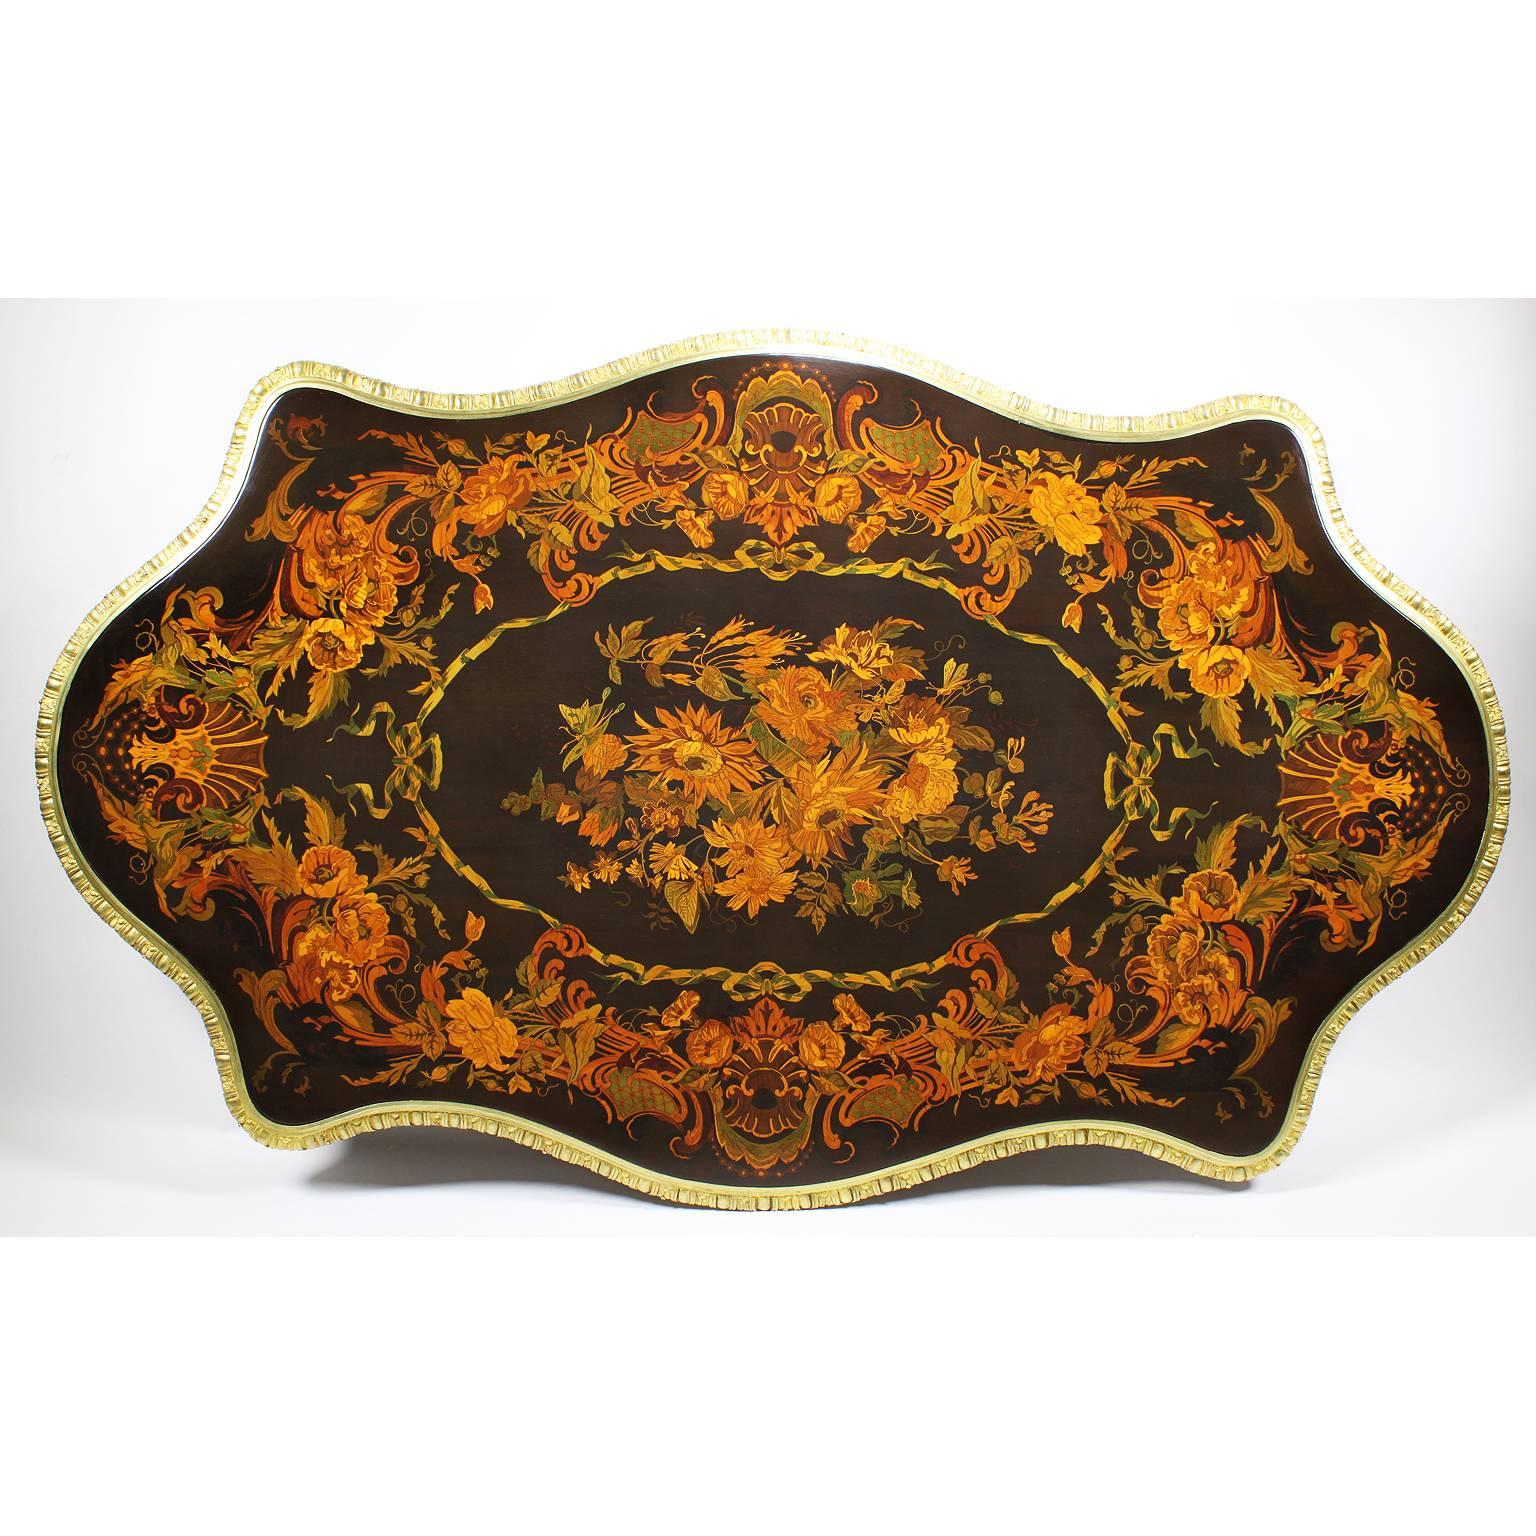 A very fine Italian 19th century mahogany, satinwood and tulipwood floral marquetry and gilt bronze-mounted centre table. The ornately decorated marquetry top centred with a floral bouquet design within a banded ribbon medallion, flanked all around